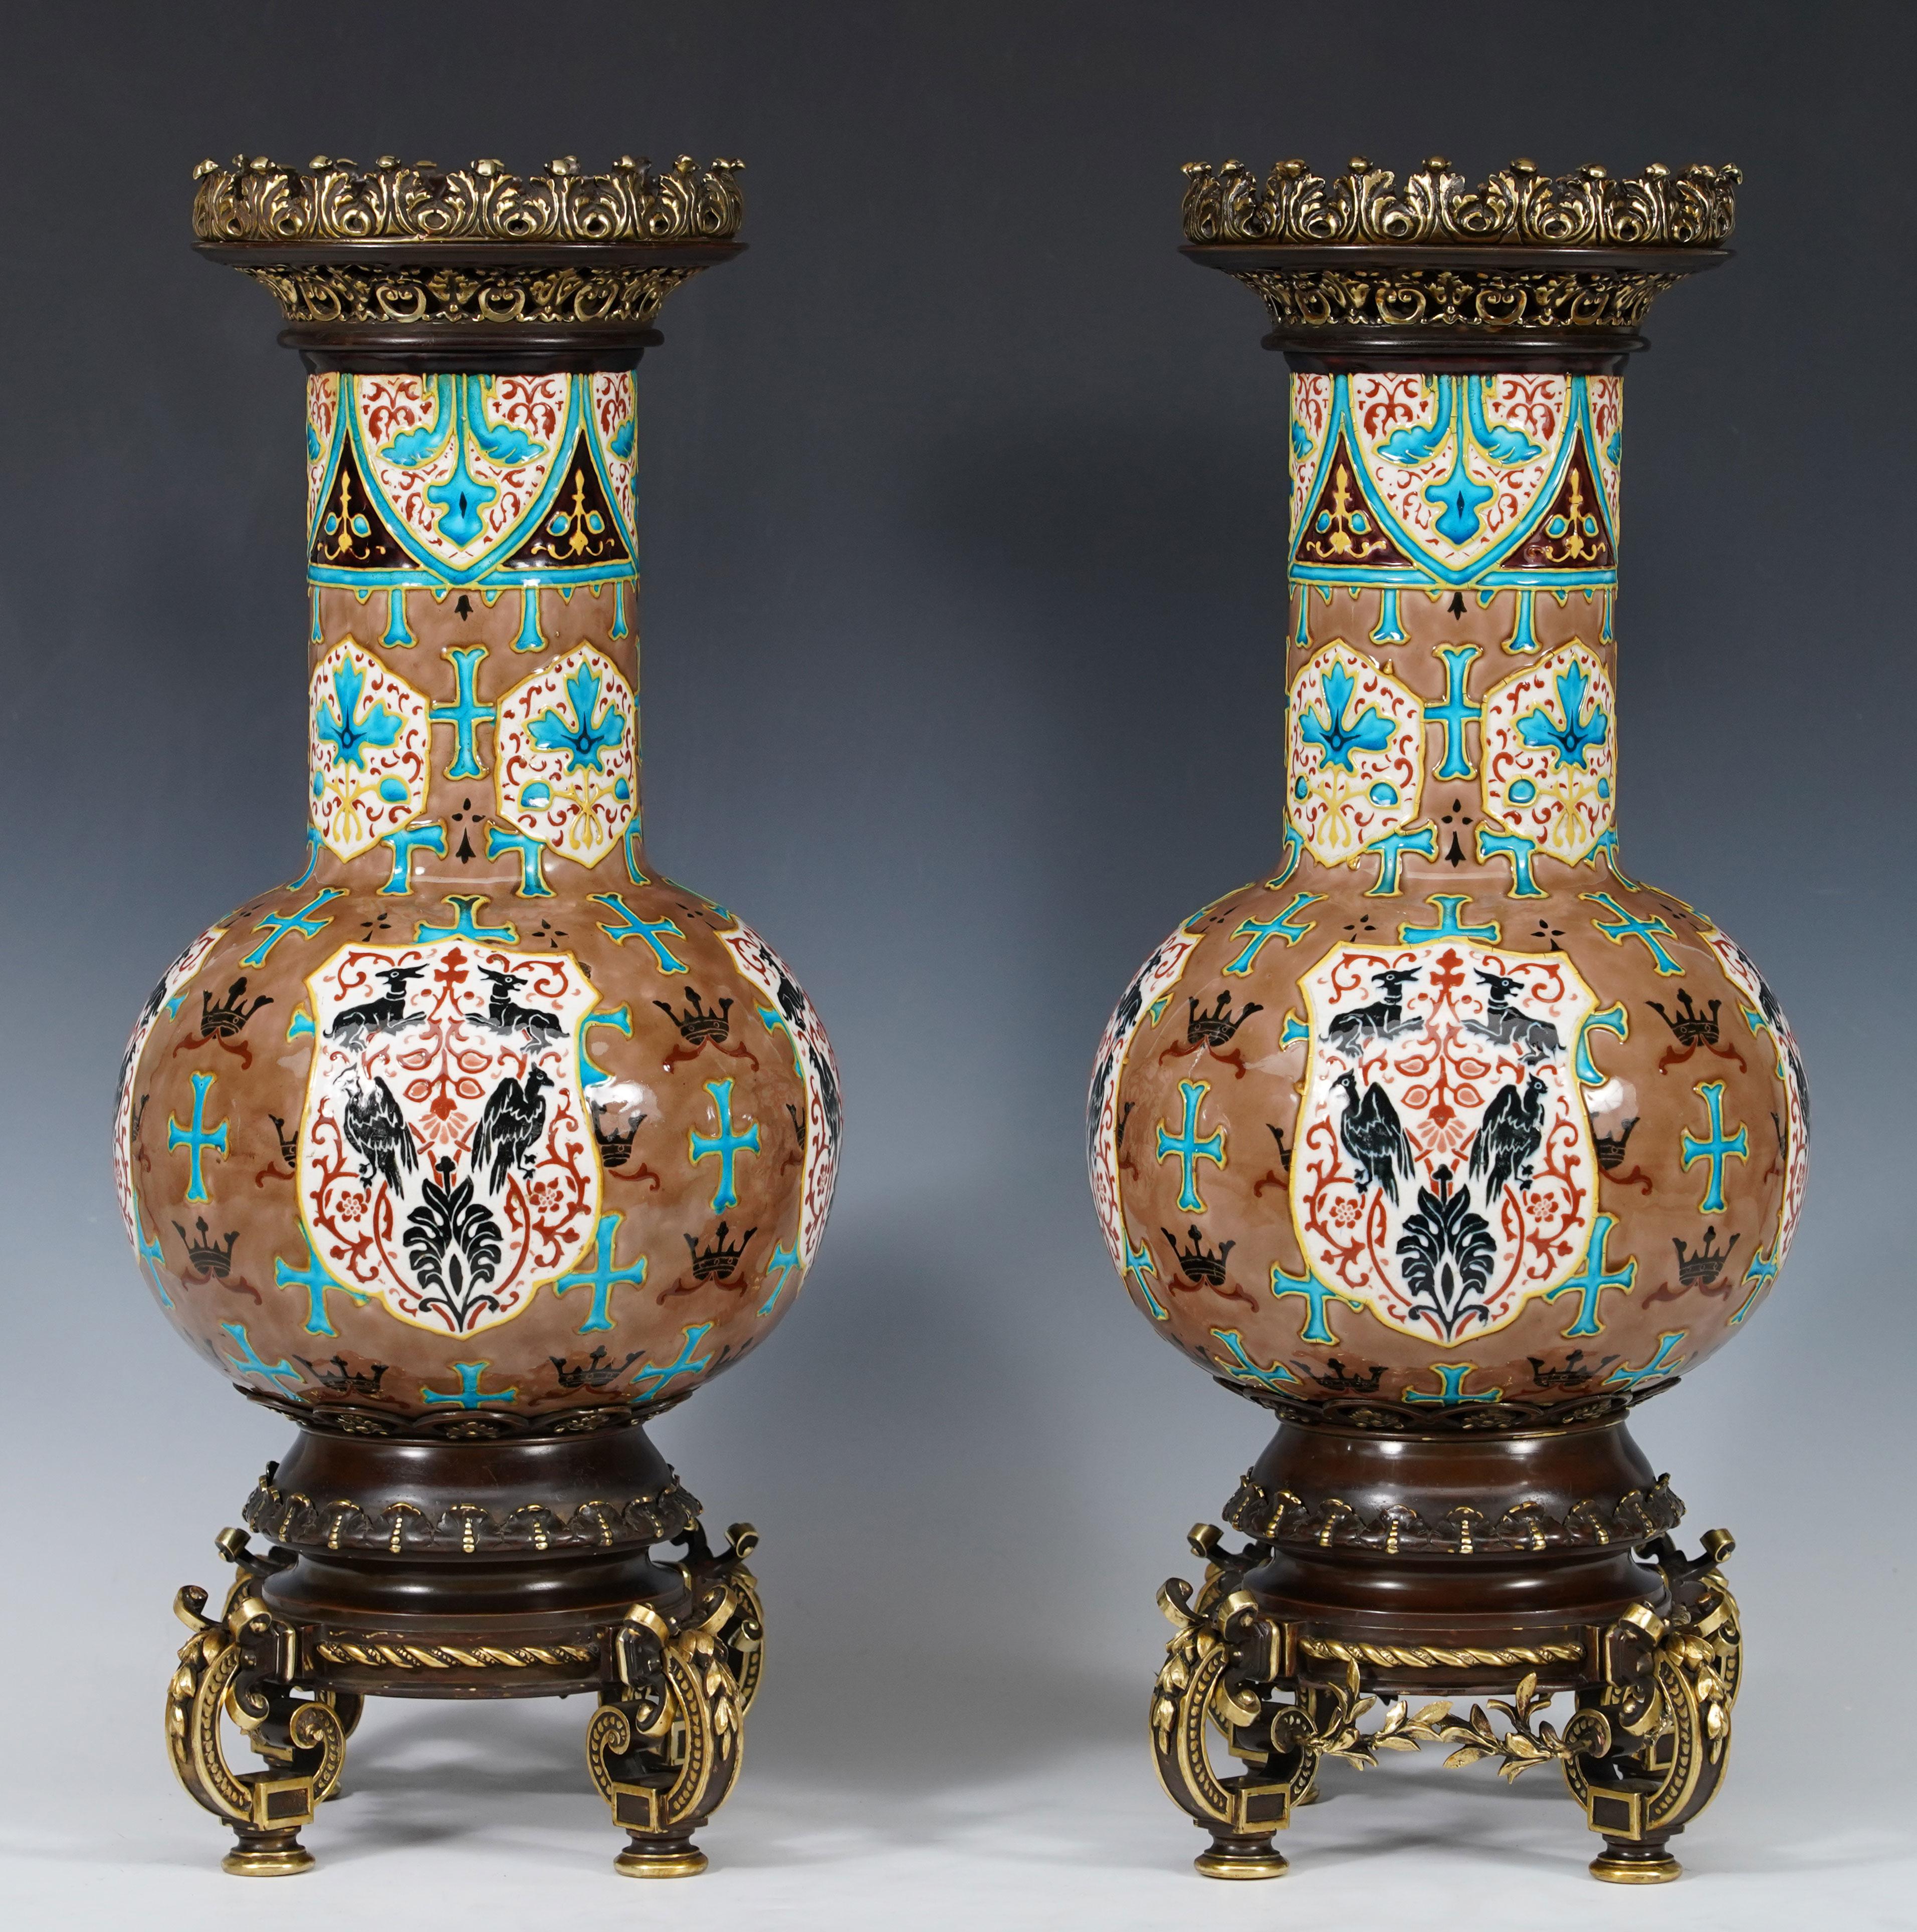 Manufacturer’s Mark of J.Vieillard & Cie à Bordeaux 

A fine pair of polychrome earthenware baluster vases, decorated on a brown background with anchored crosses, crowns and ermines, heraldic medallions featuring deer and birds of prey. 
The whole